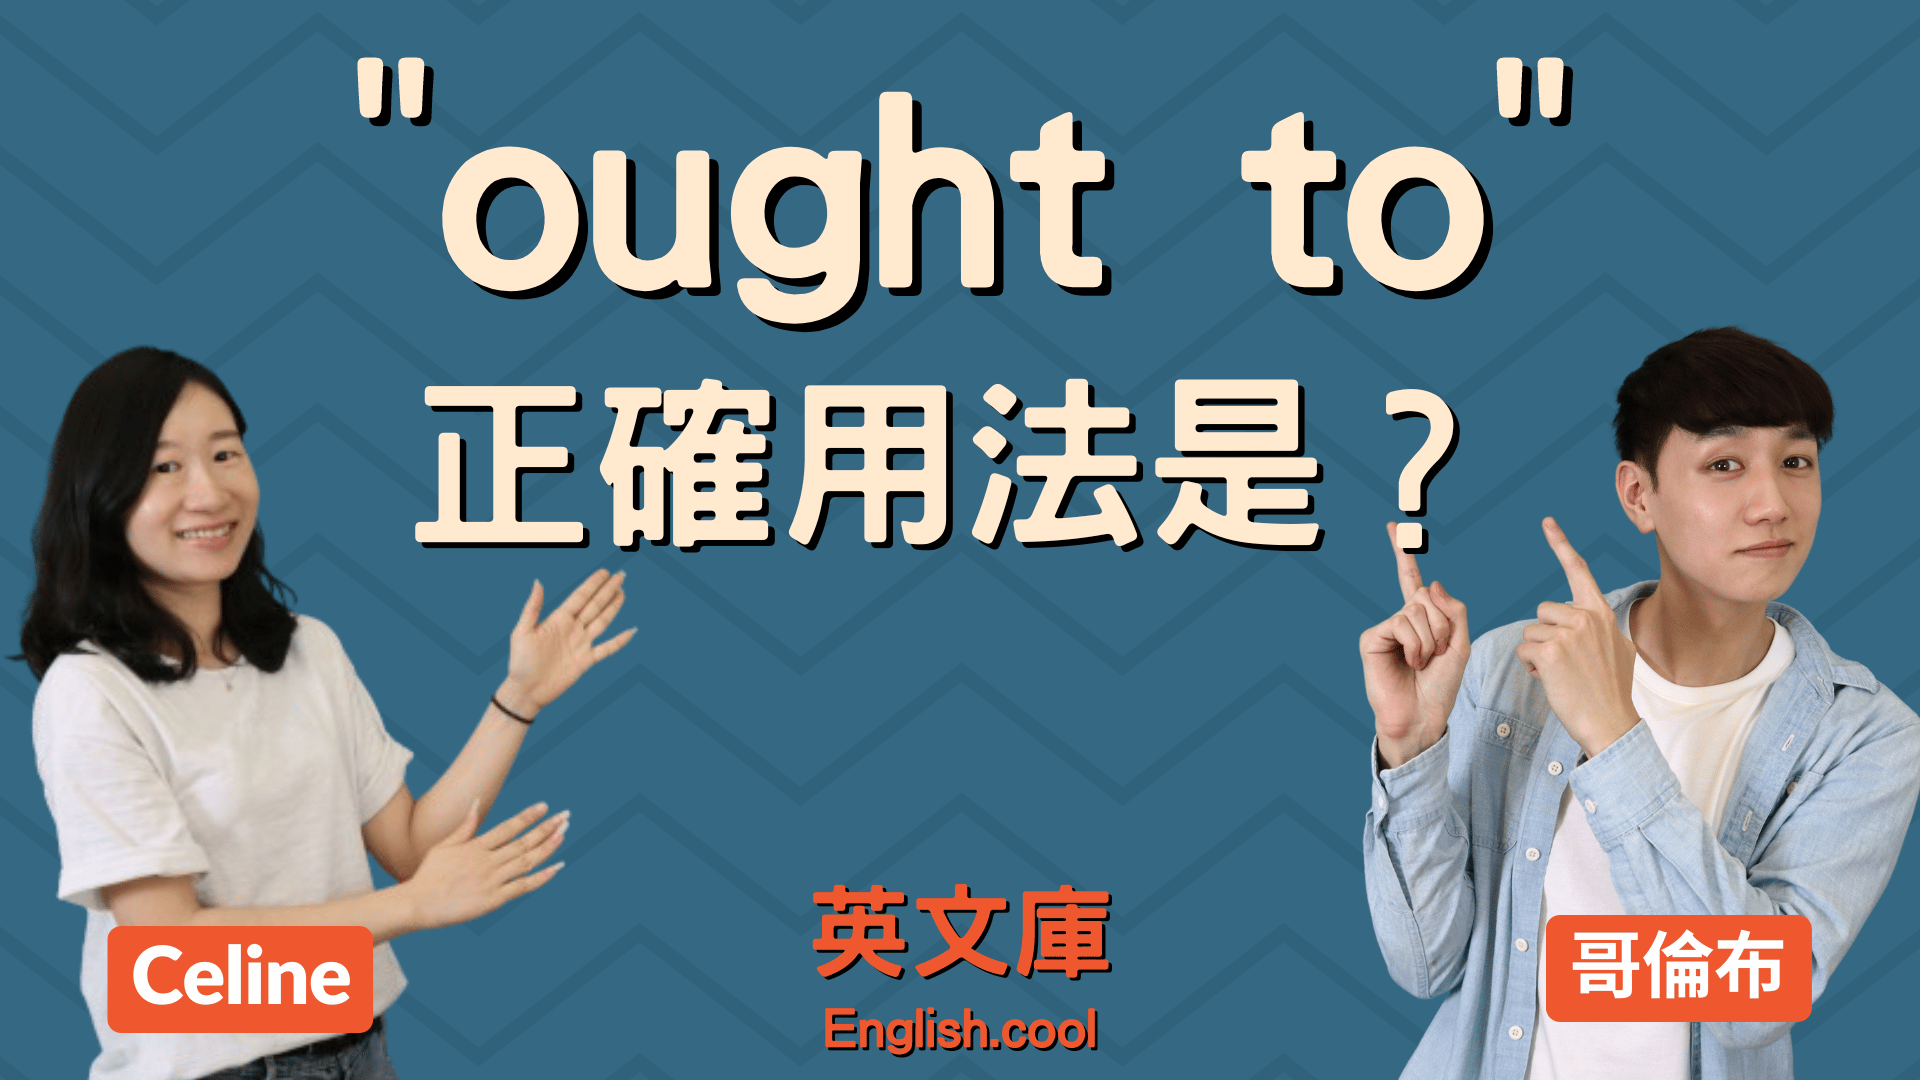 You are currently viewing 「ought to」正確用法是？可以說「ought not to」嗎？